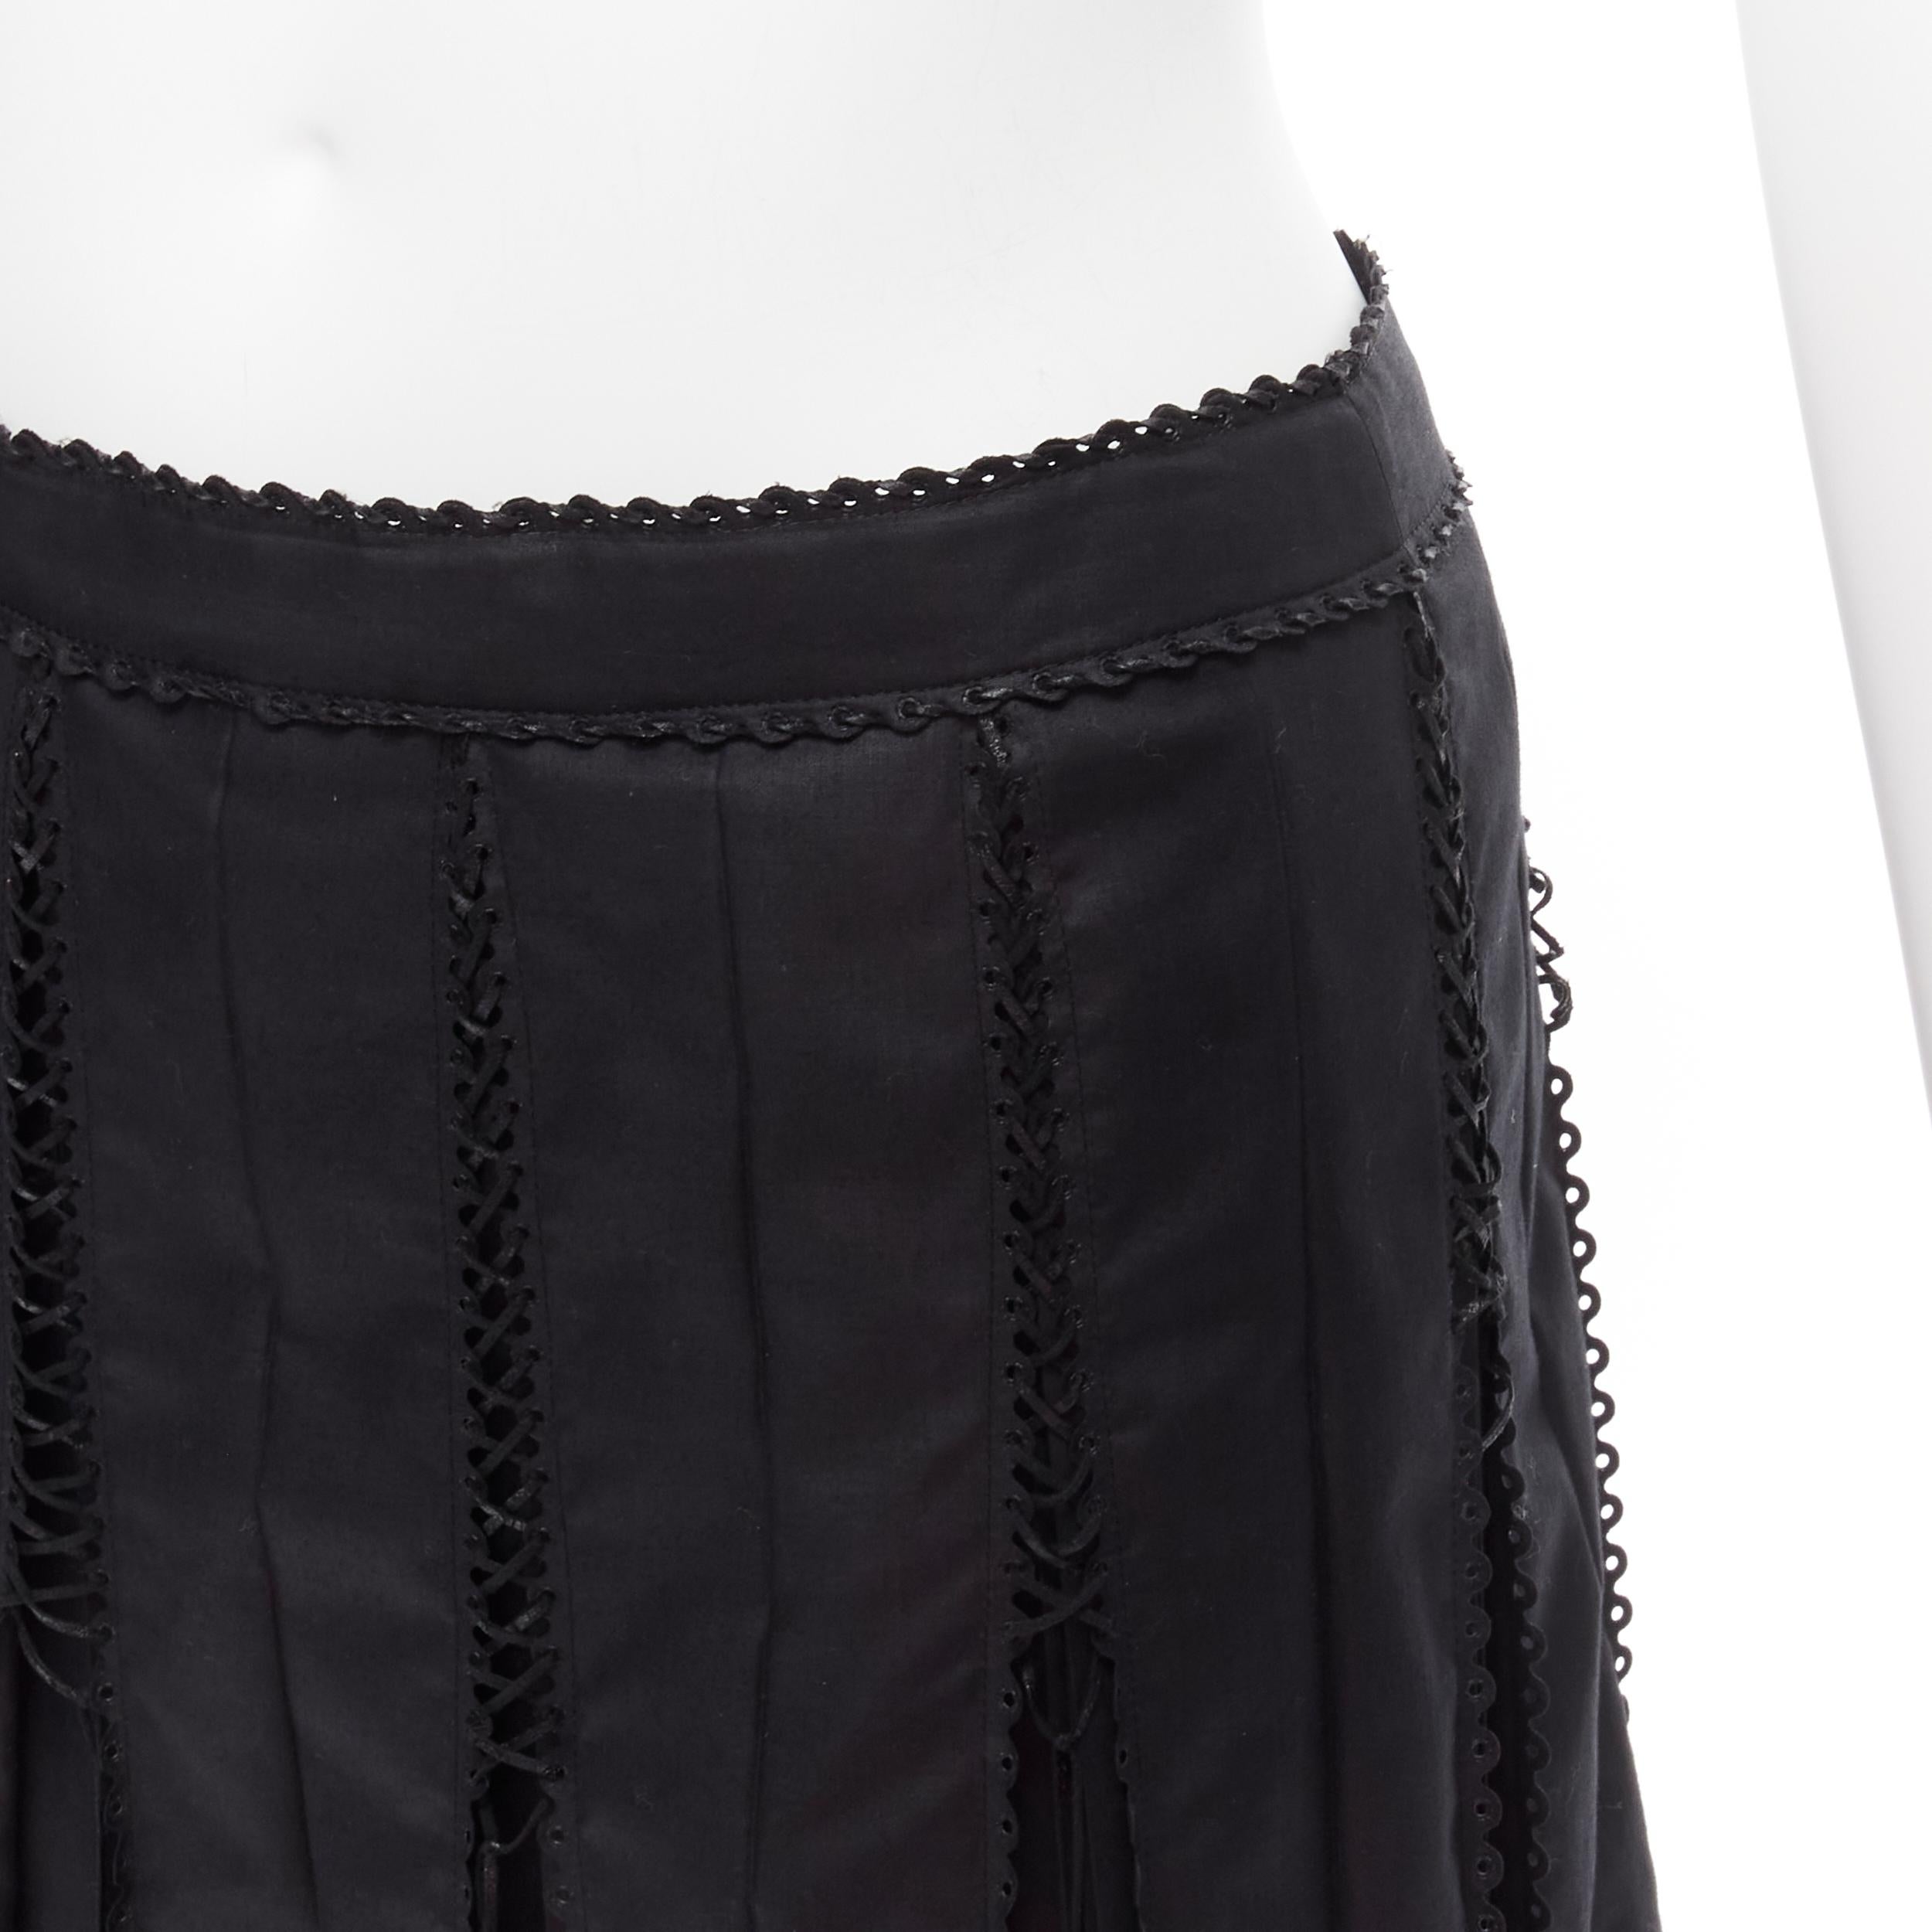 ISSEY MIYAKE FETE black lace up box pleat pleated knee flared skirt JP2 M
Reference: TGAS/D00147
Brand: Issey Miyake
Collection: Fete
Material: Polyester
Color: Black
Pattern: Solid
Closure: Zip
Lining: Black Fabric
Extra Details: Back invisible zip